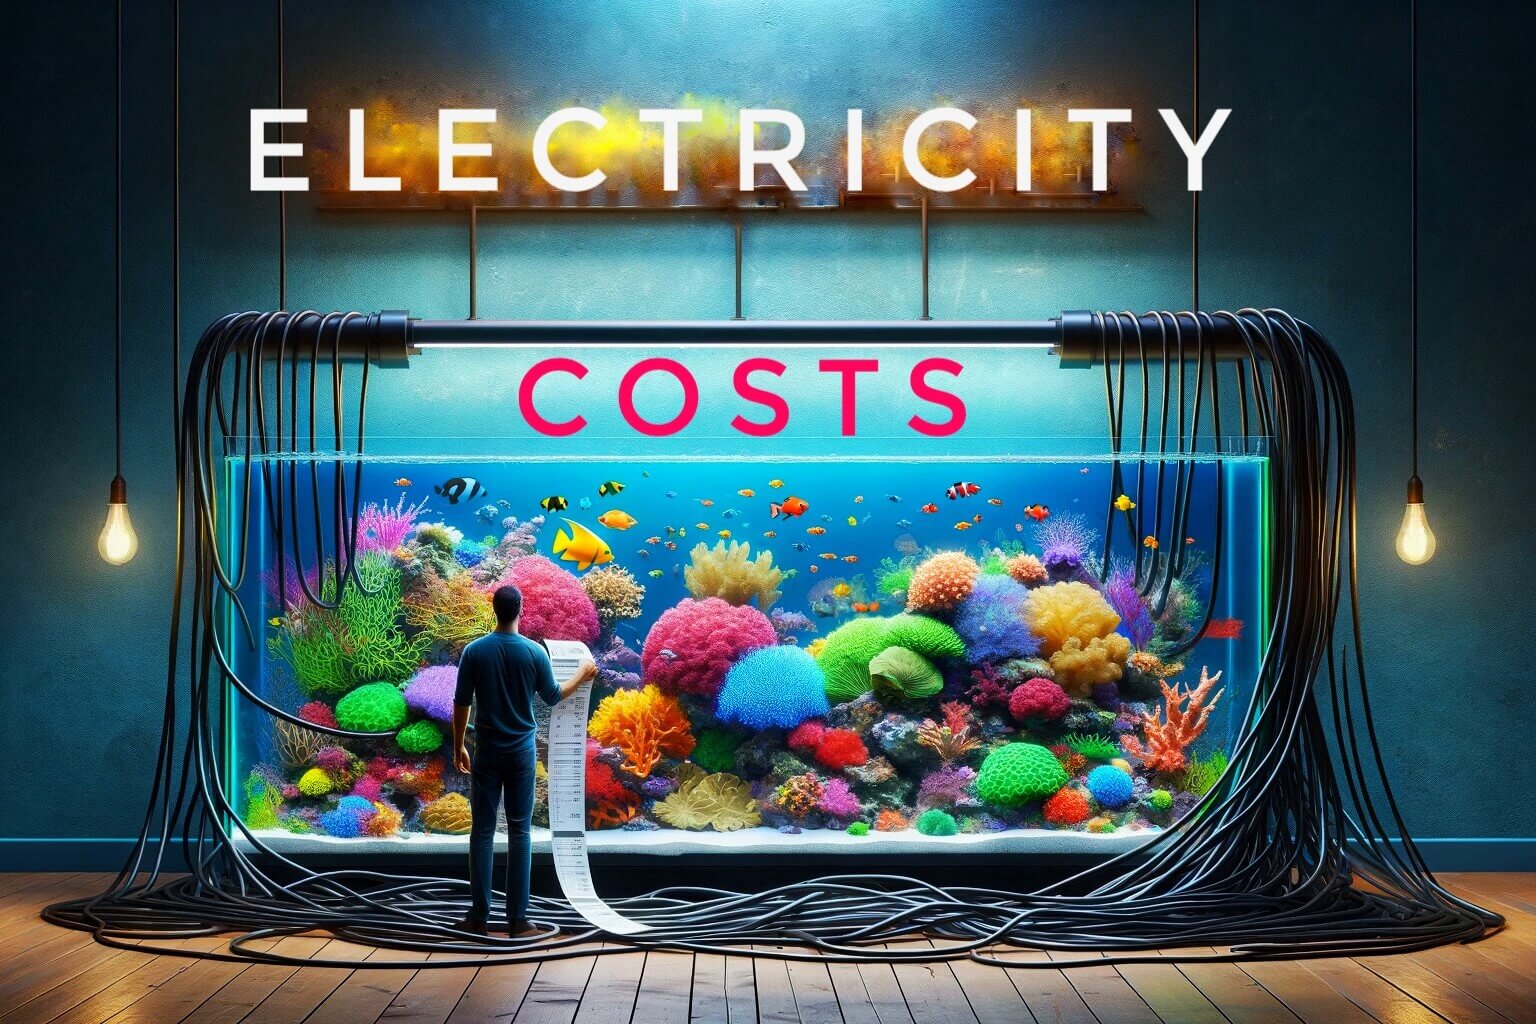 Do Reef aquariums cost a lot in electricity? blog image